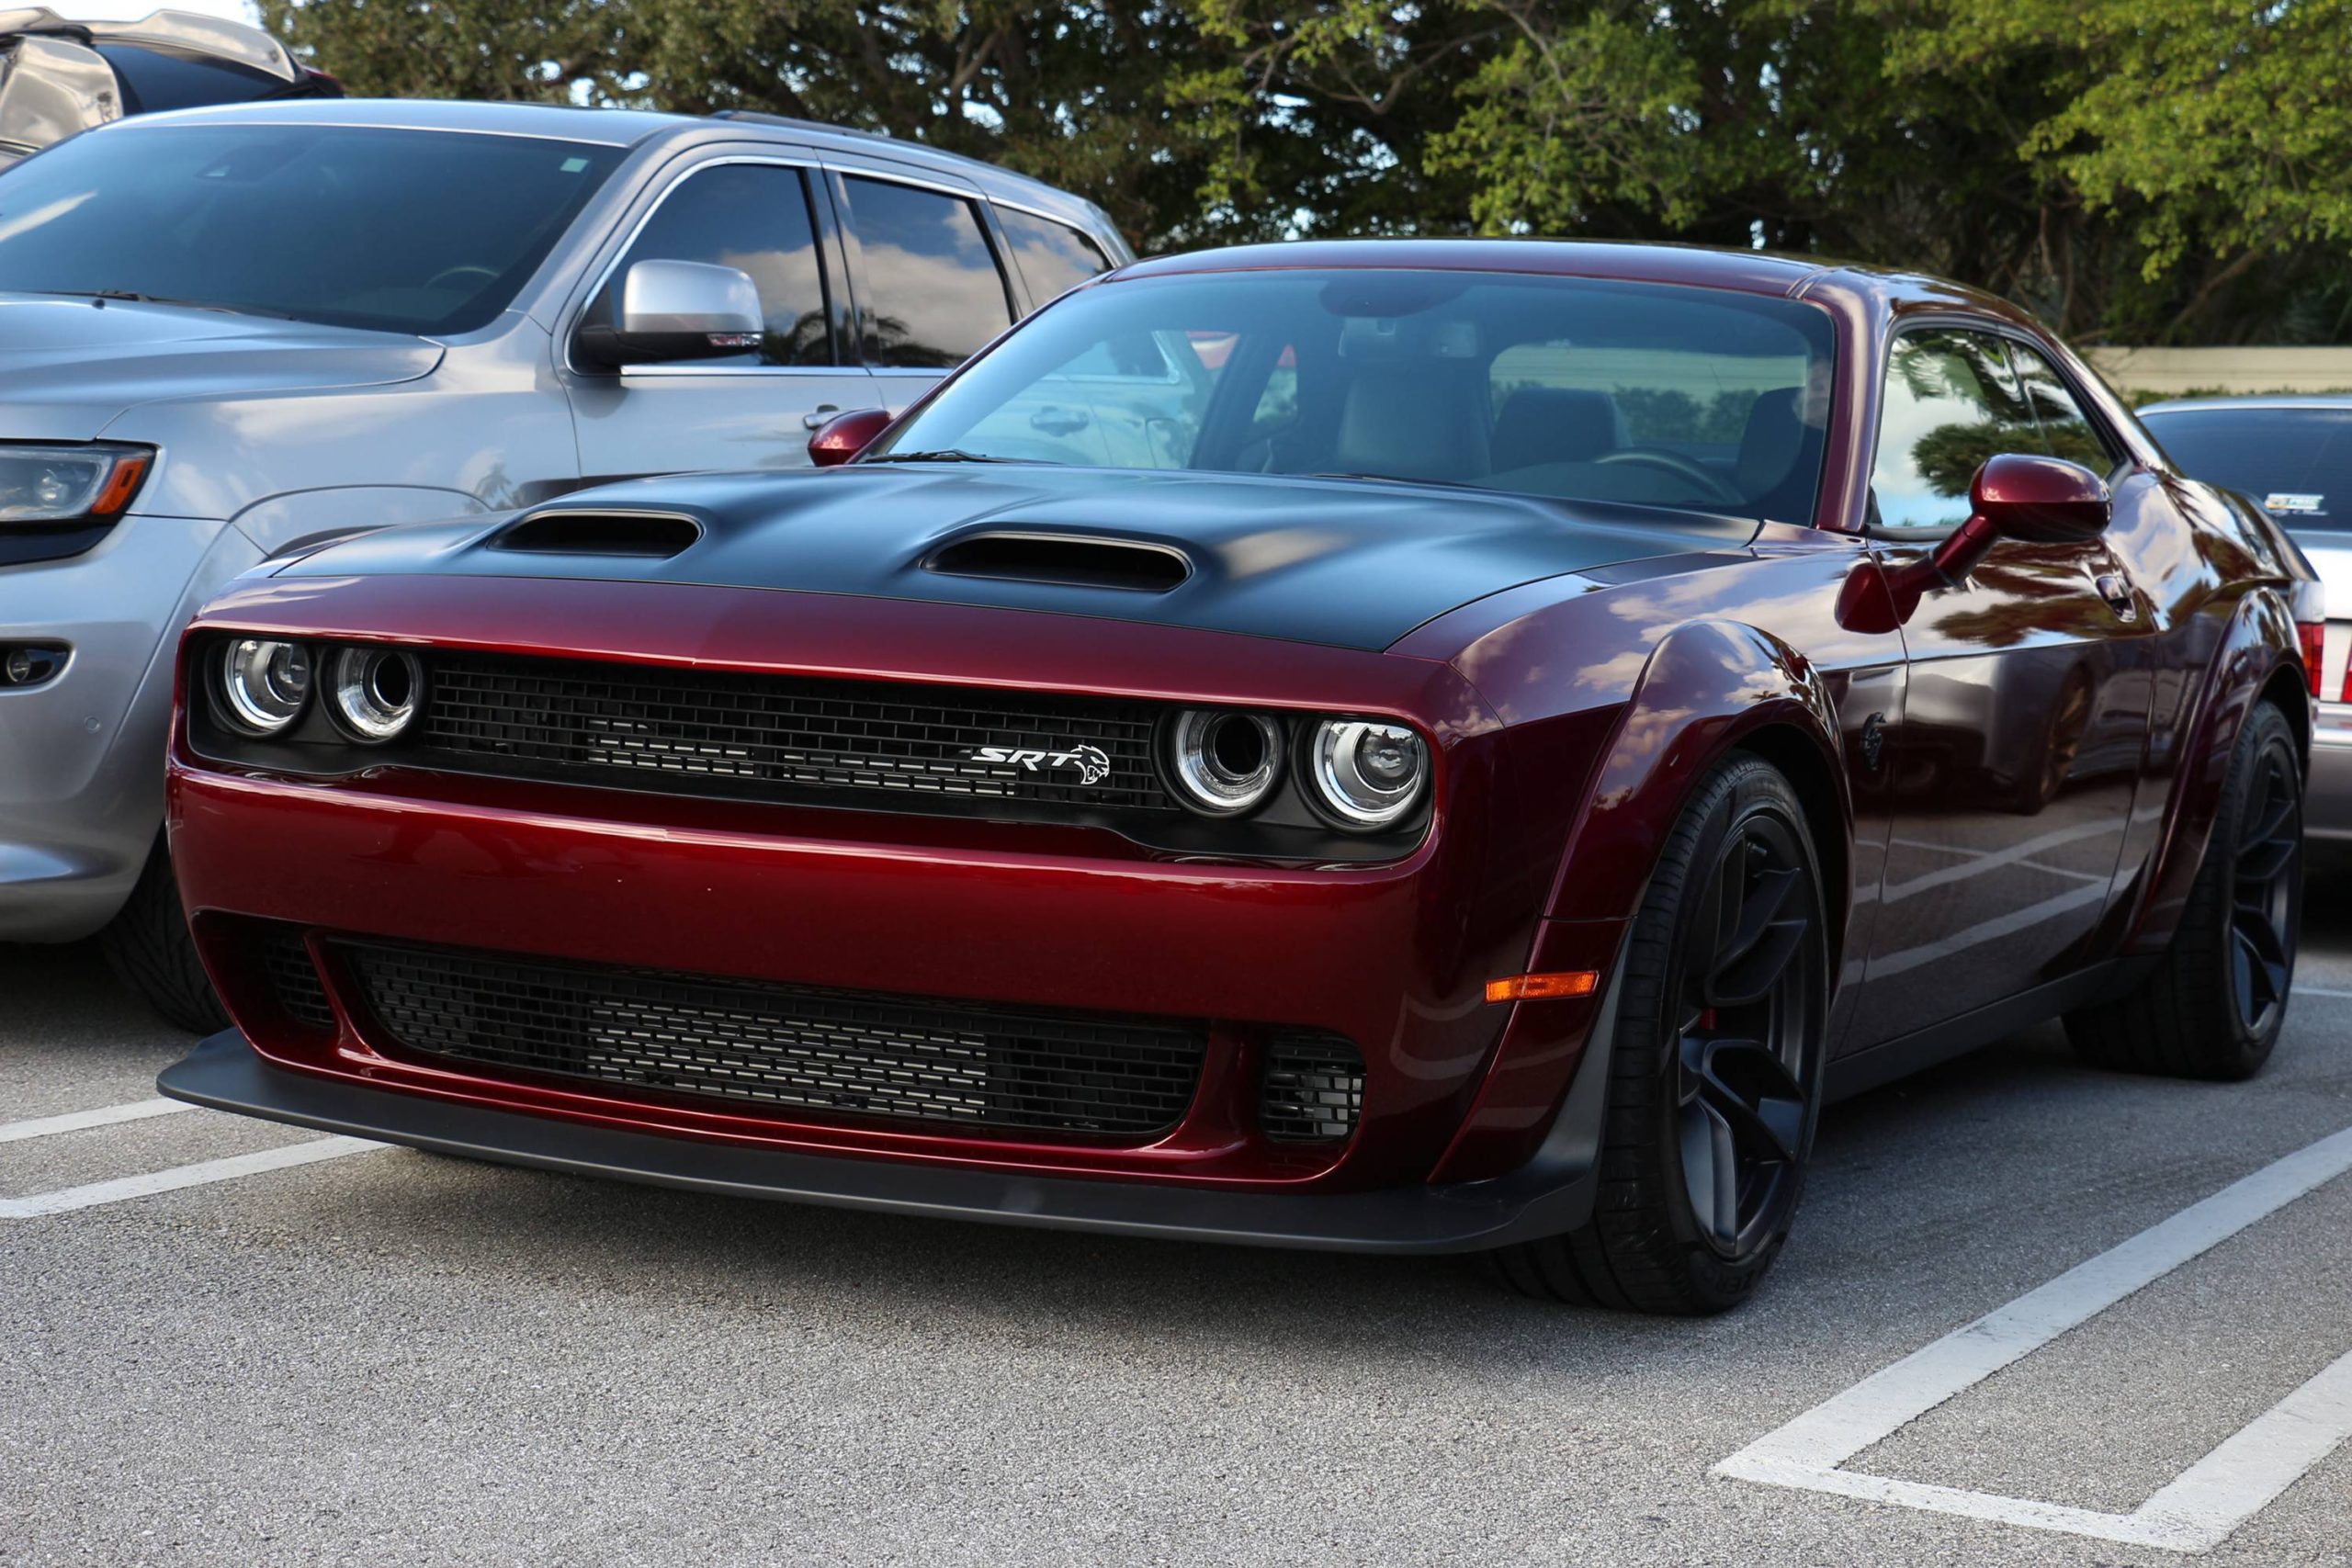 Dodge Hellcat Widebody in the most beautiful maroon color I’ve ever seen